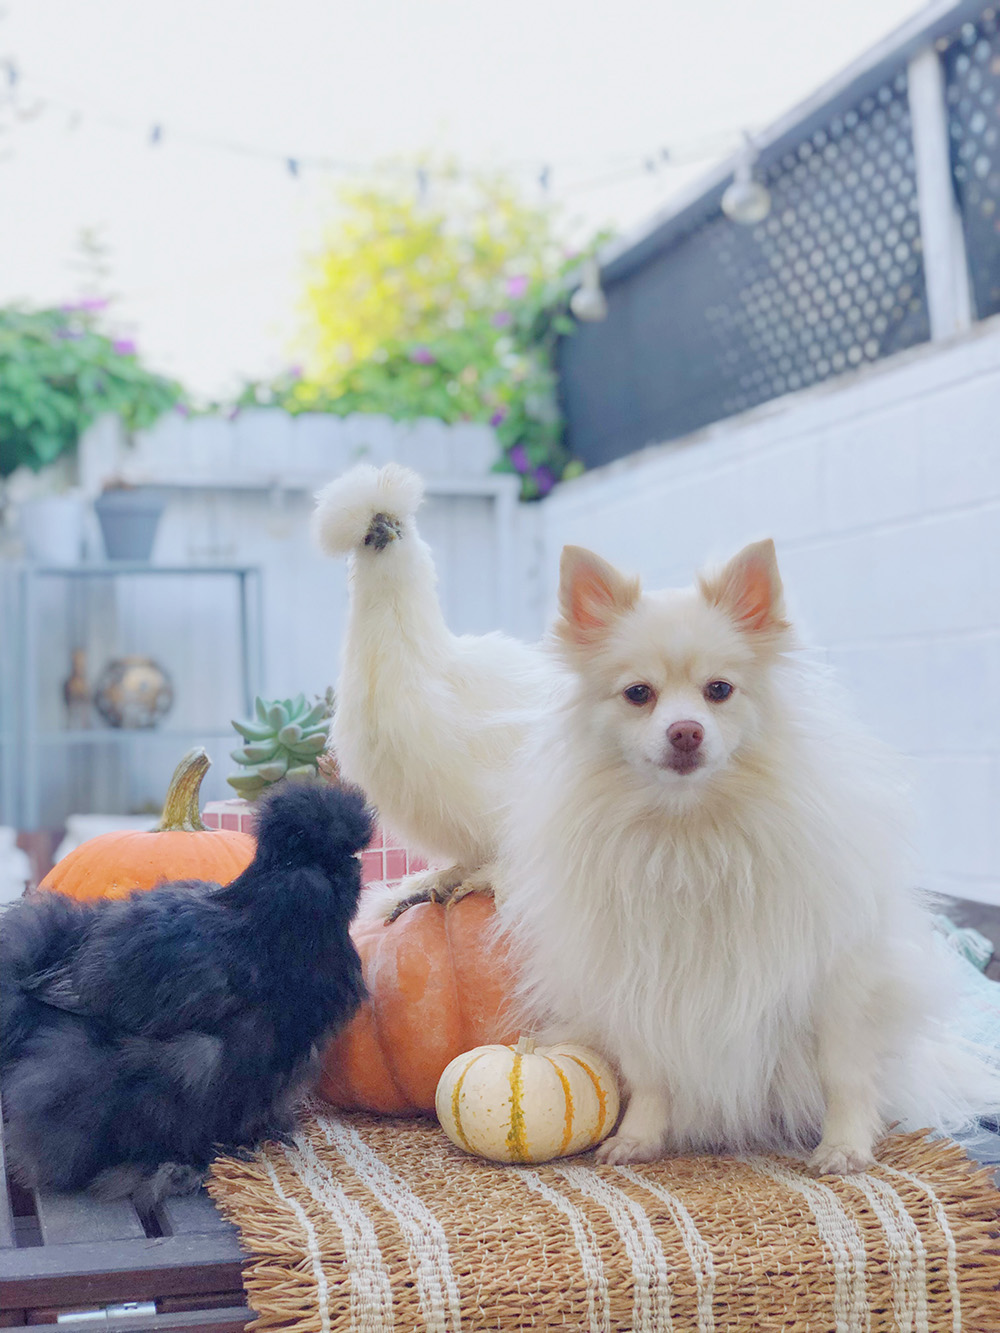 Mango and the silkie chicks